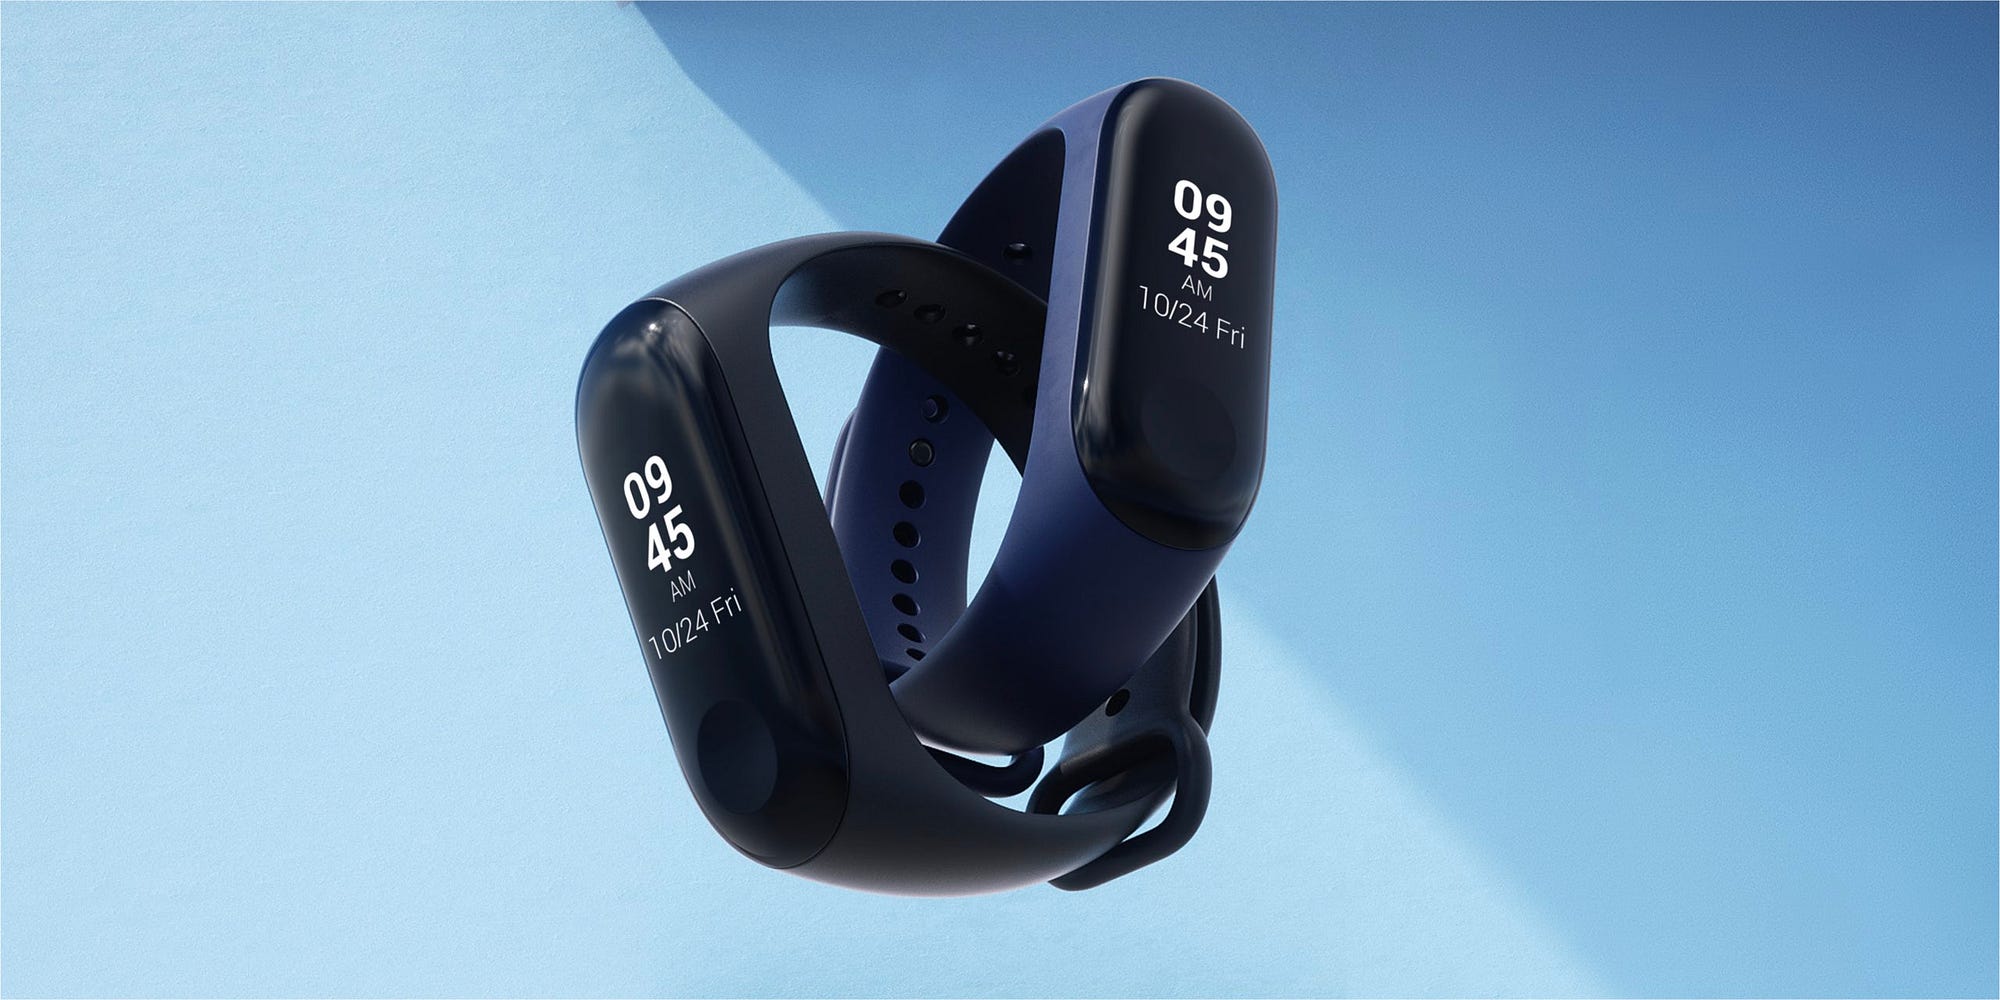 Xiaomi Mi Band 9: Expectations, release date 